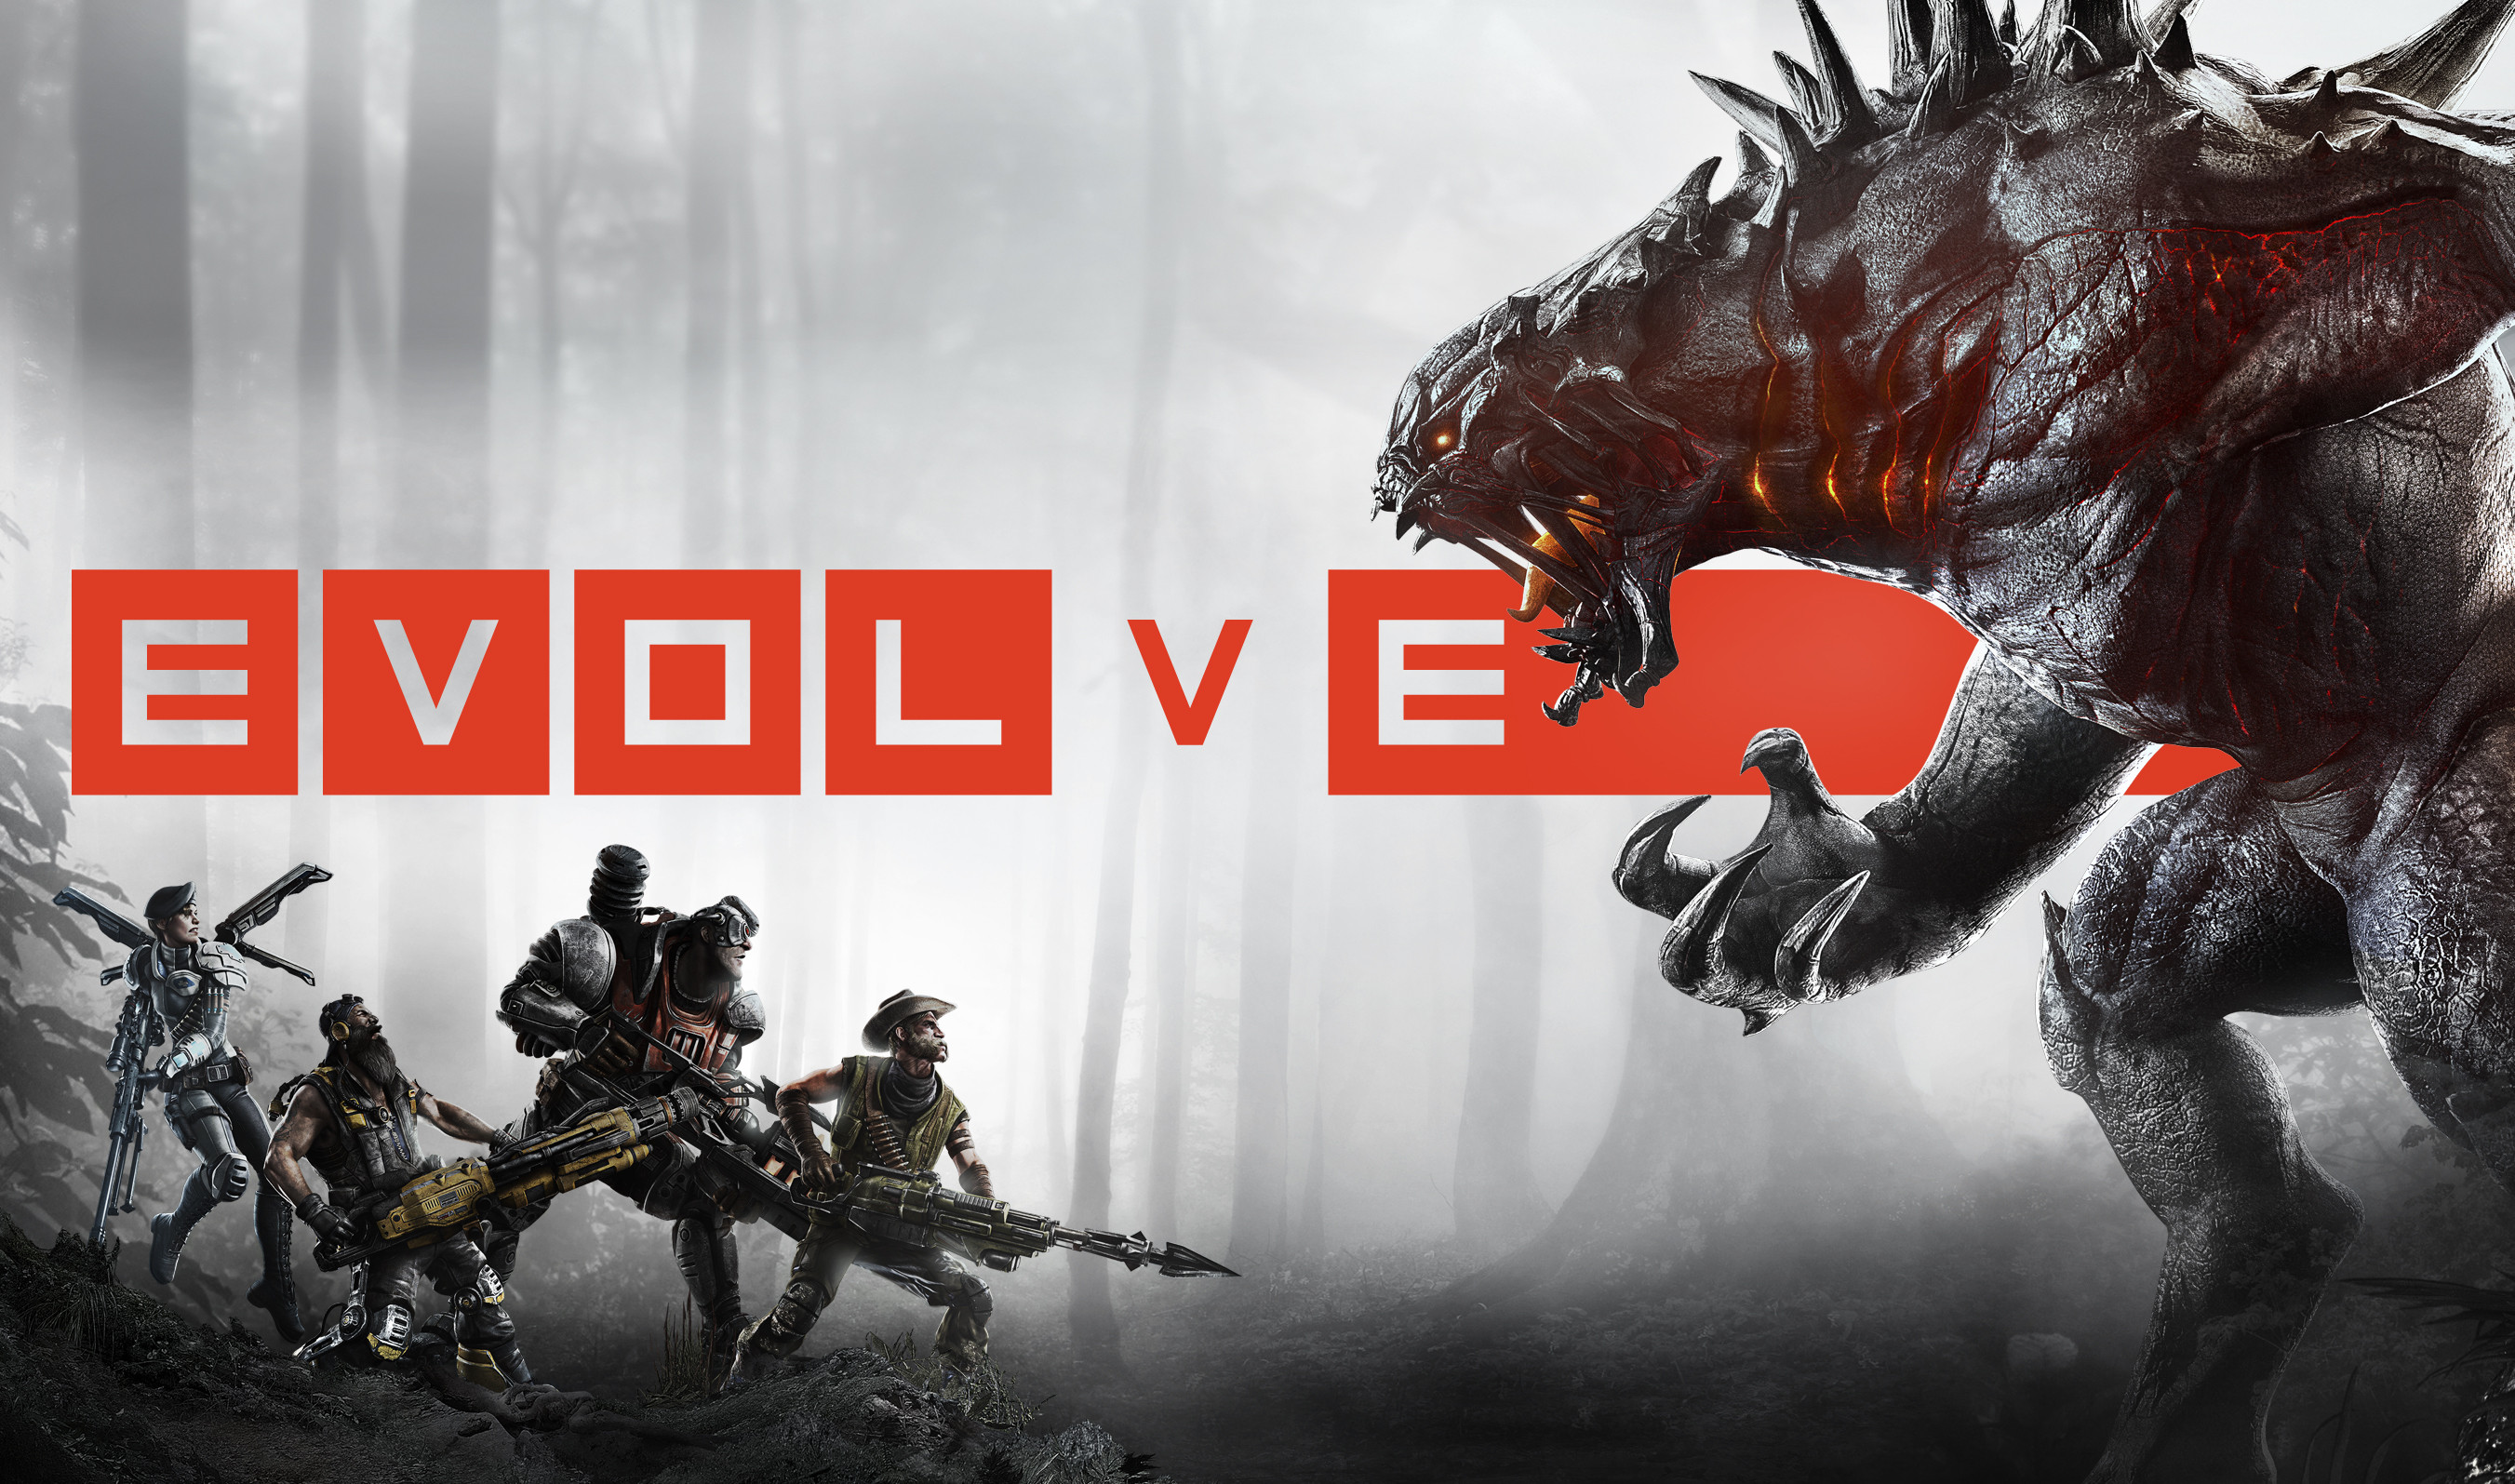 Evolve Picture And Wallpaper HD